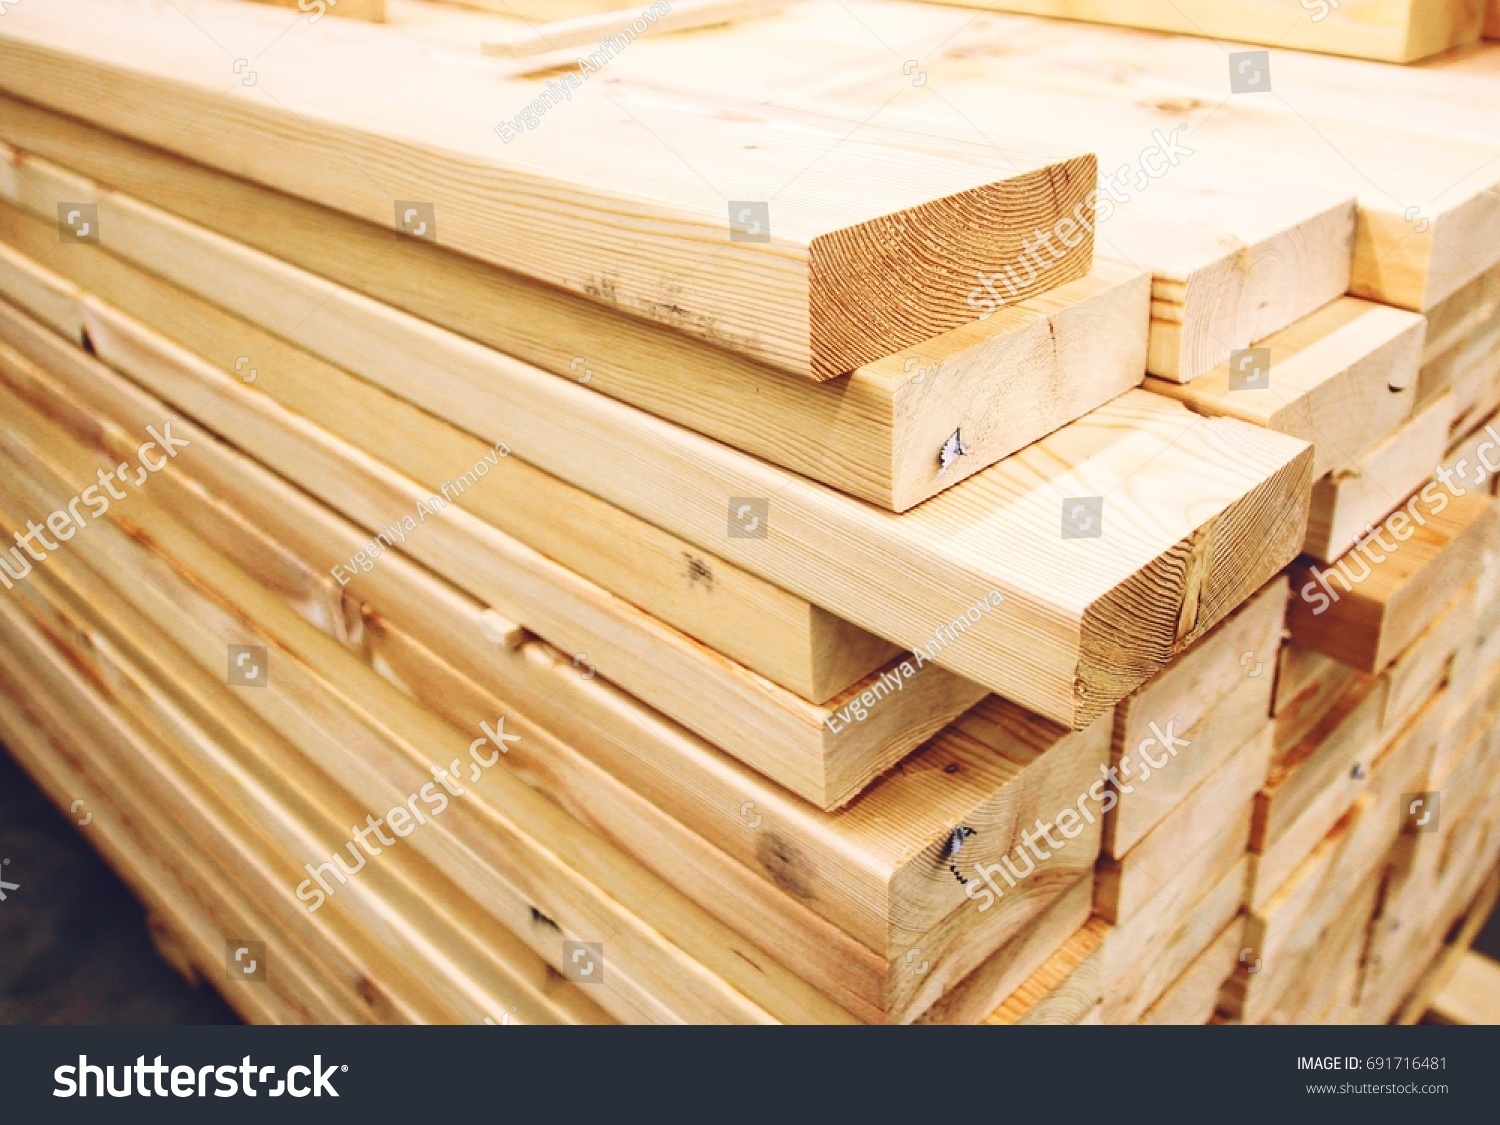 Wooden planks, lining, boards for construction works #691716481